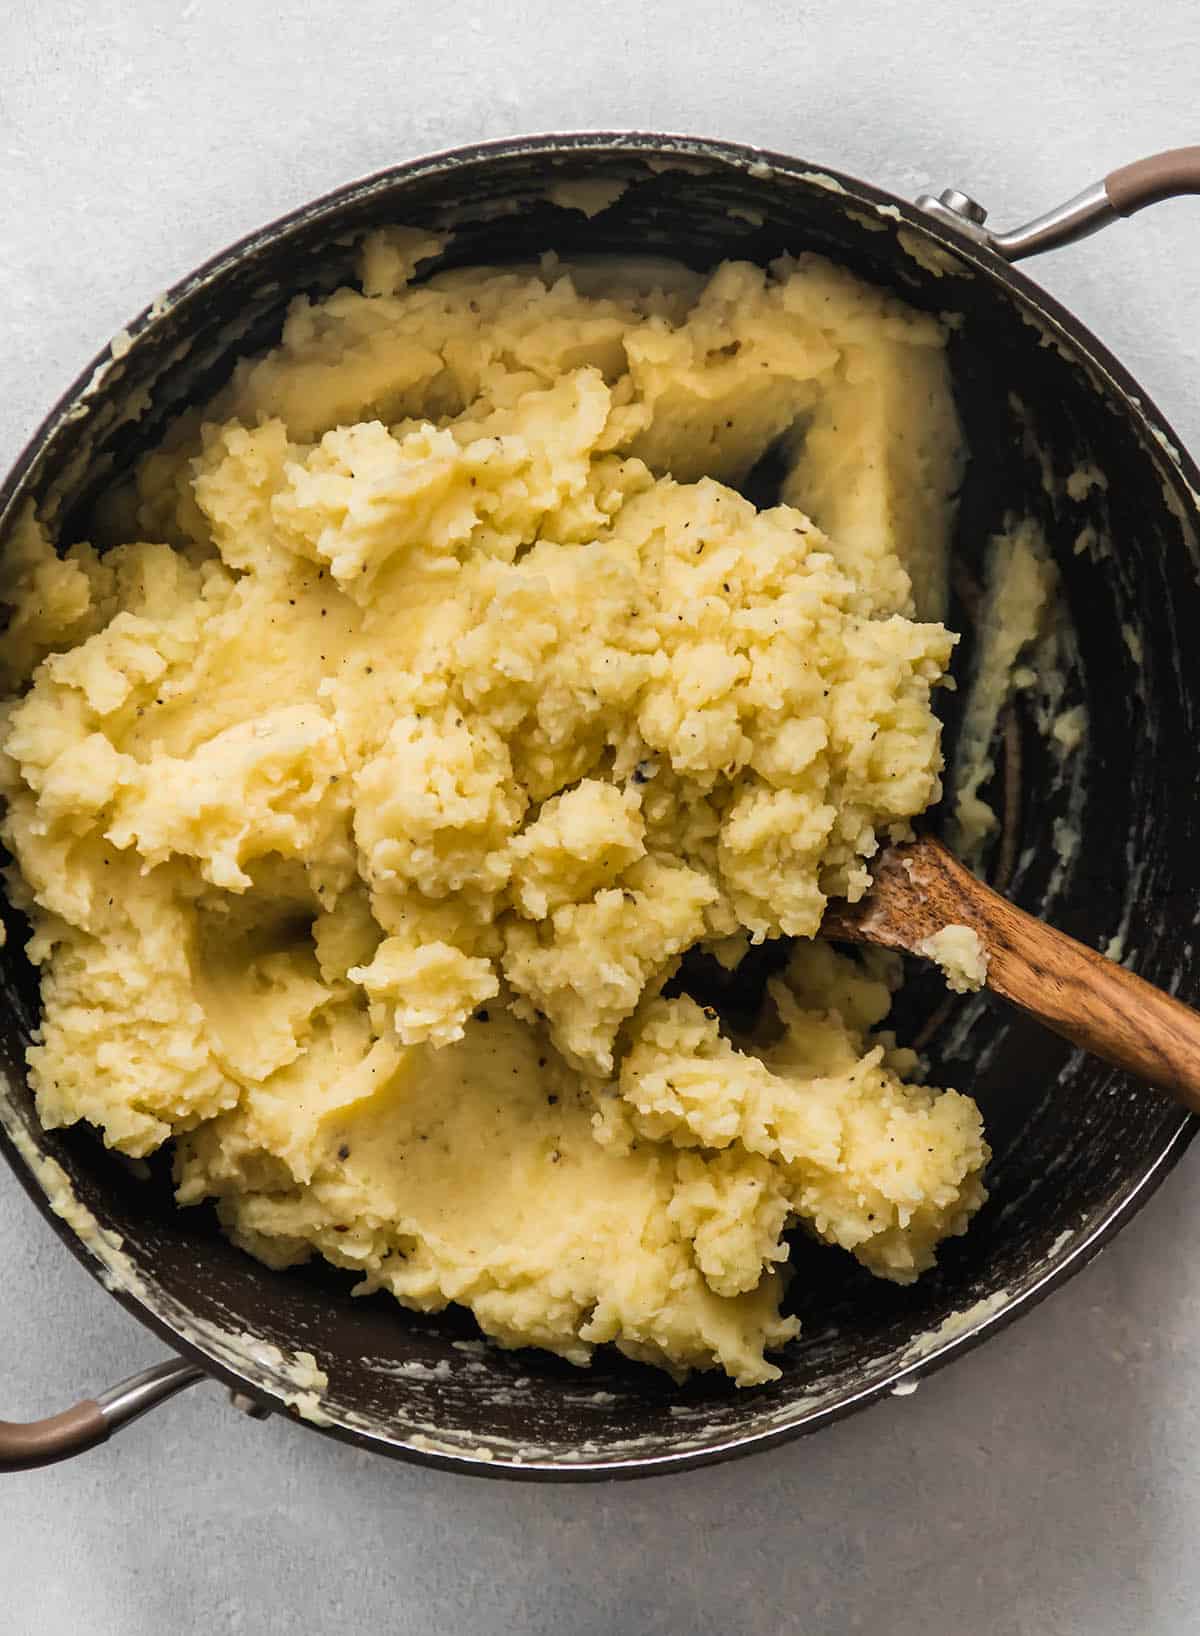 Stirring cauliflower mashed potatoes together in the pot.